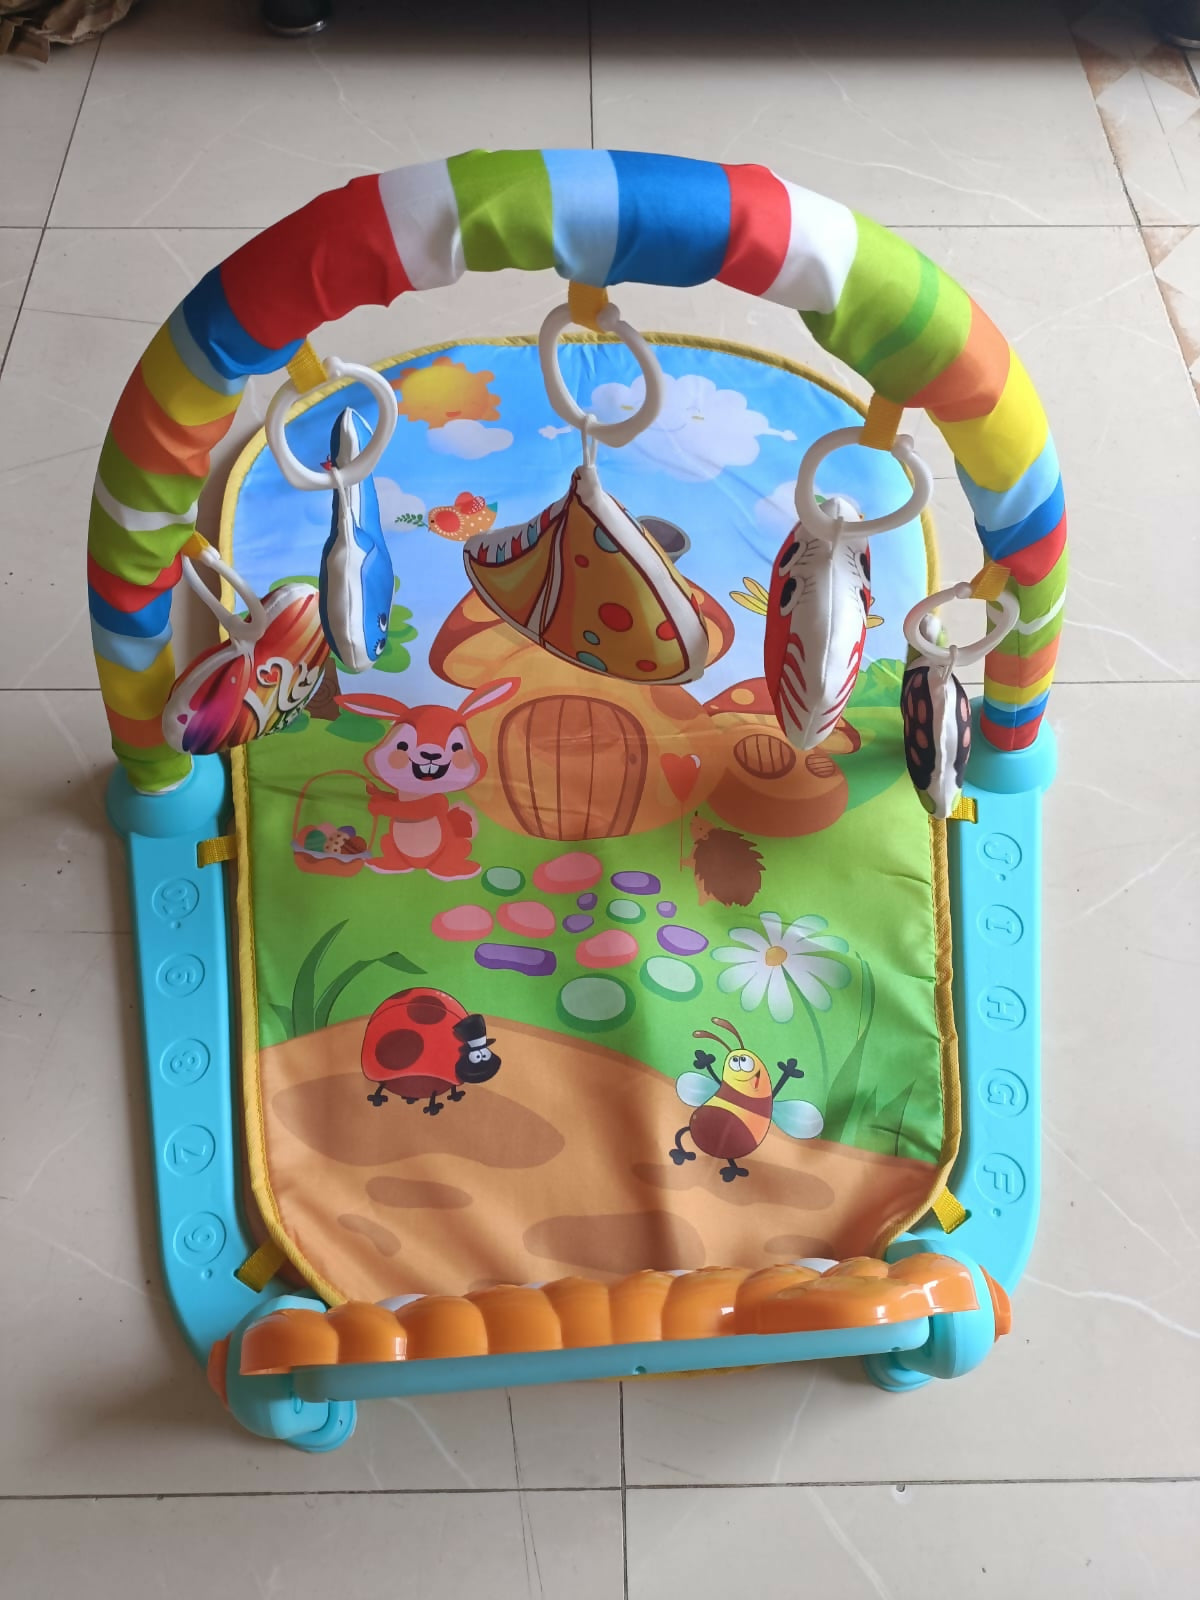 Encourage sensory exploration and musical play with the Karmax Baby's Piano Gym Mat, offering a multi-sensory experience and interactive piano keyboard for your baby's development.